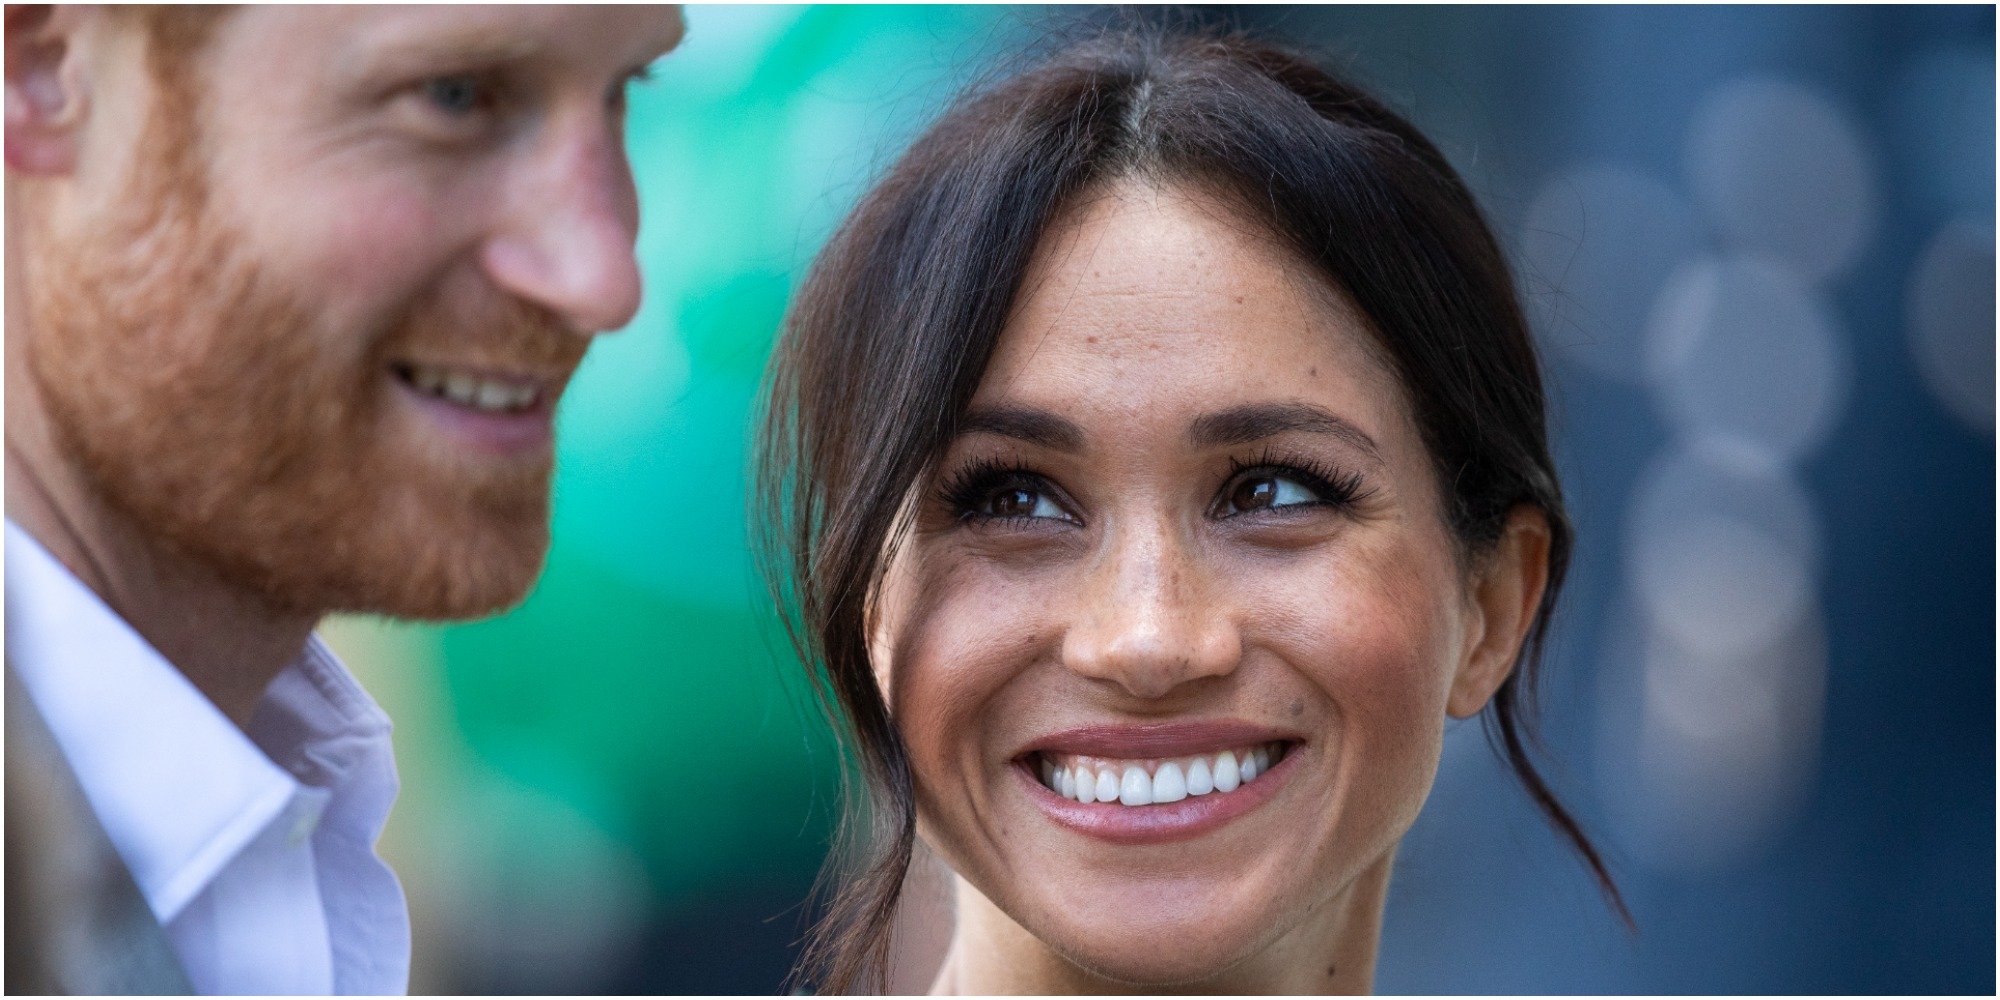 Prince Harry and Meghan Markle pose for a paparazzi photo.